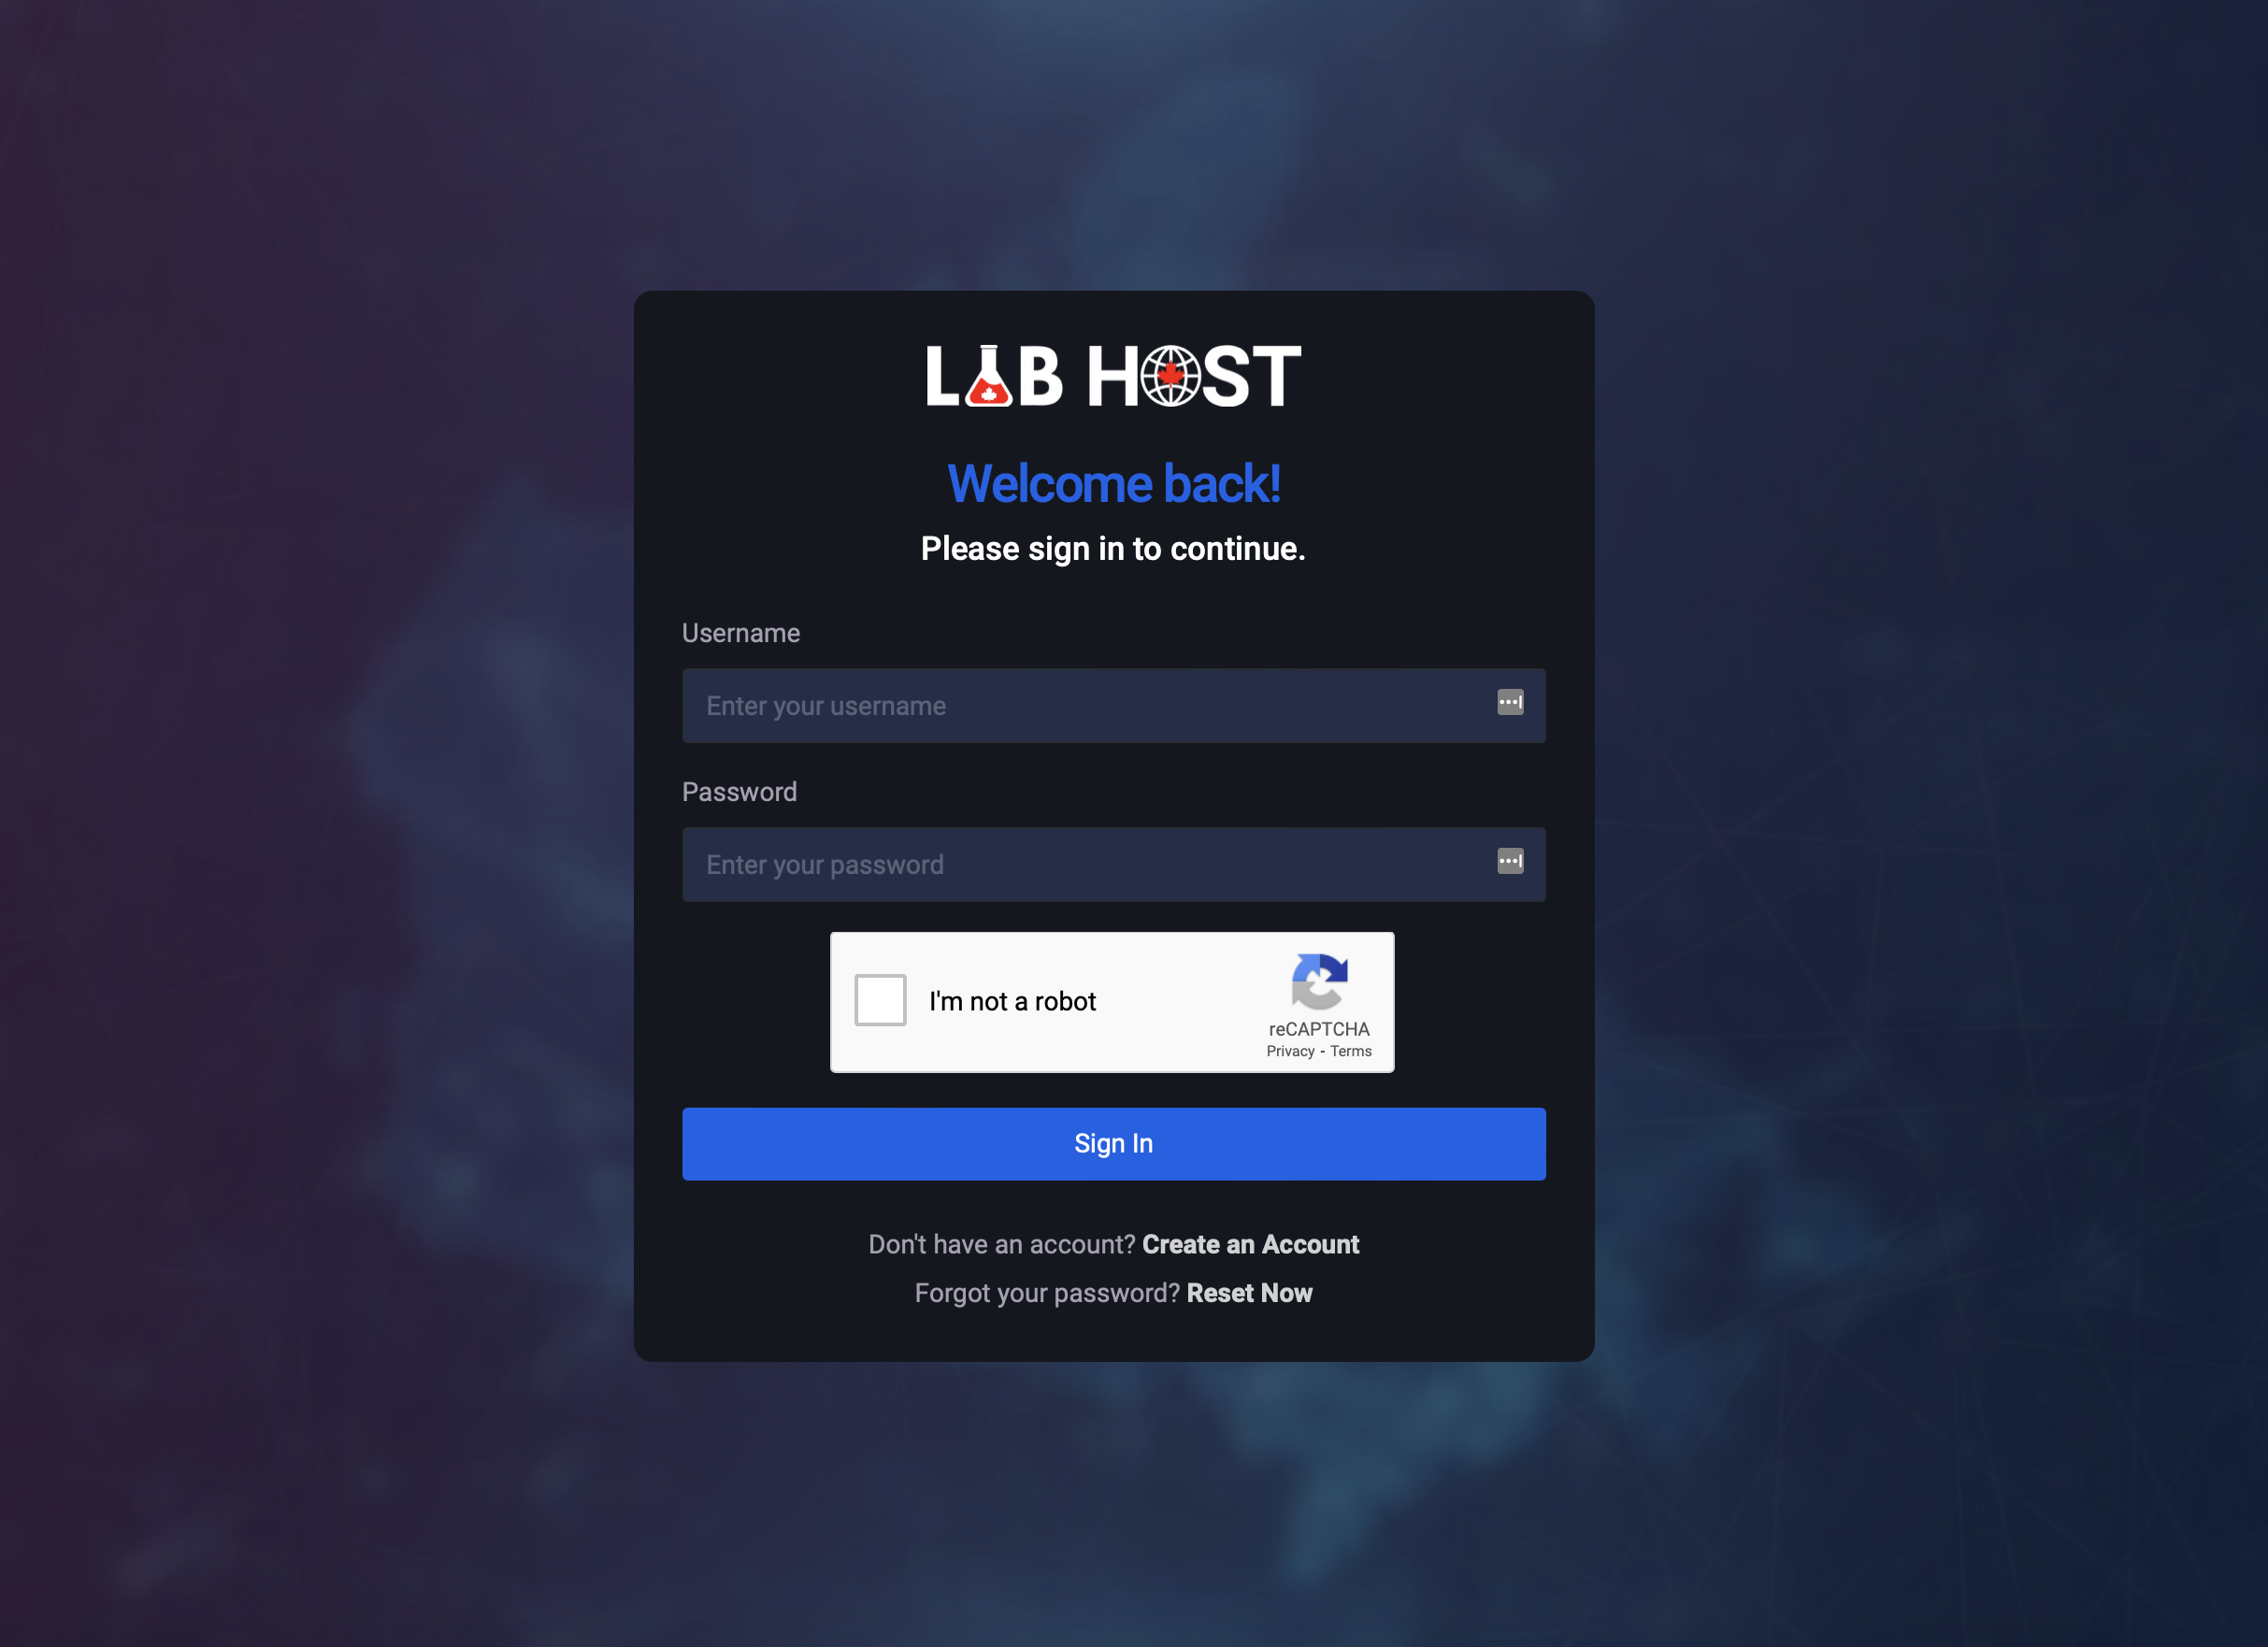 Figure 1. LabHost sign-in page